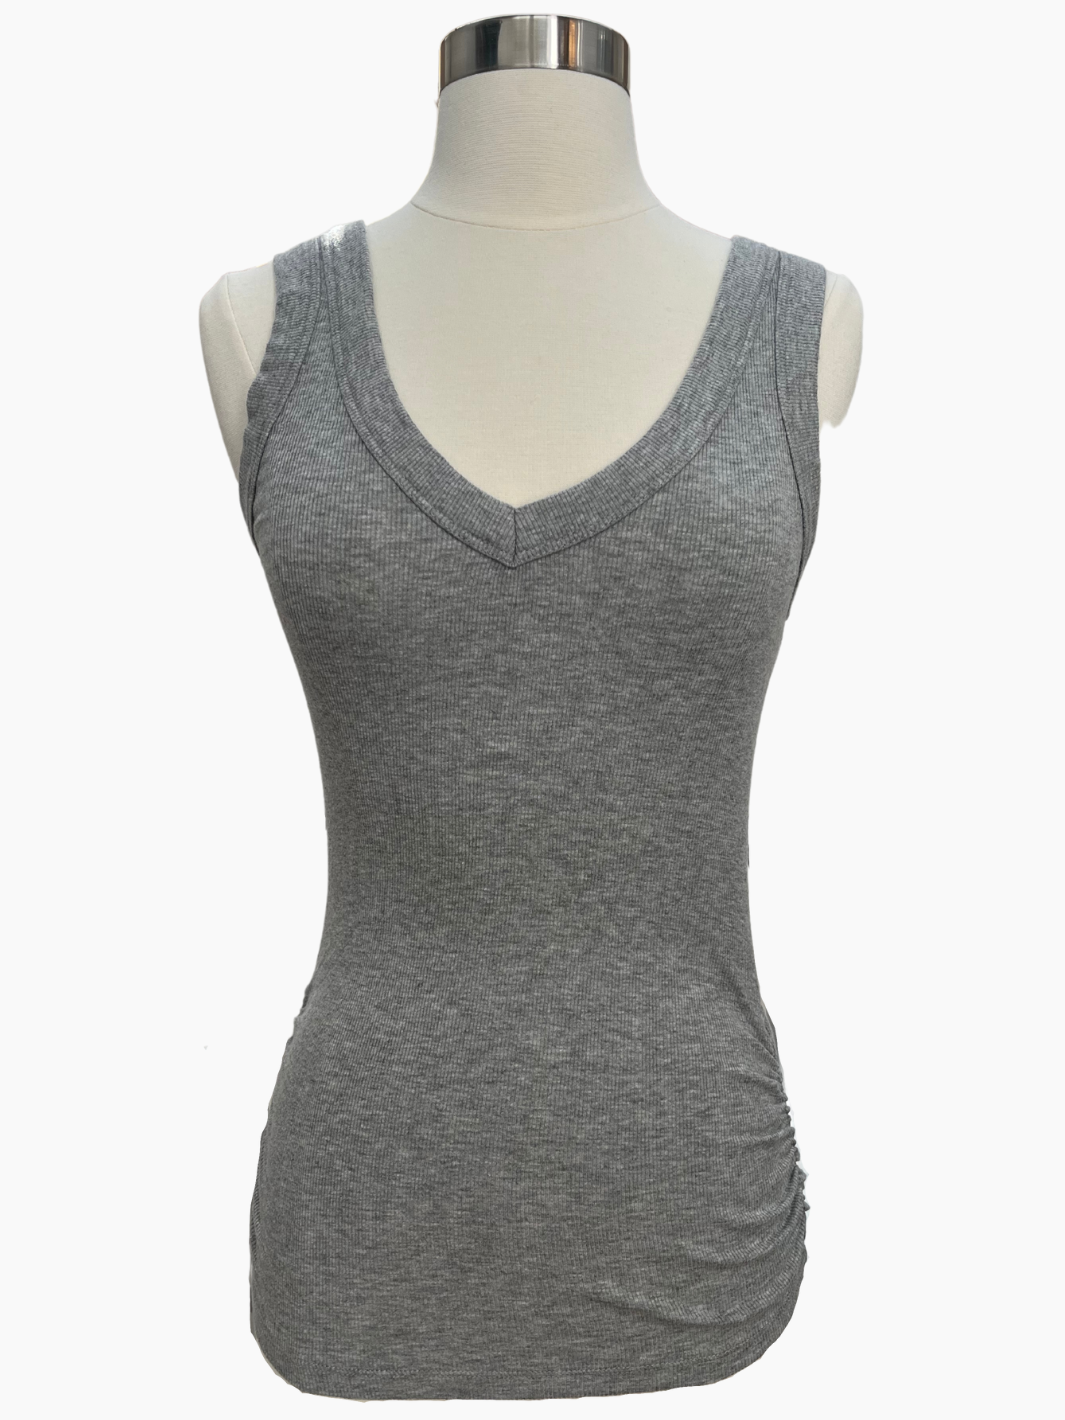 BLANCHE RUCHED SIDE TANK IN HEATHER GREY - Romi Boutique